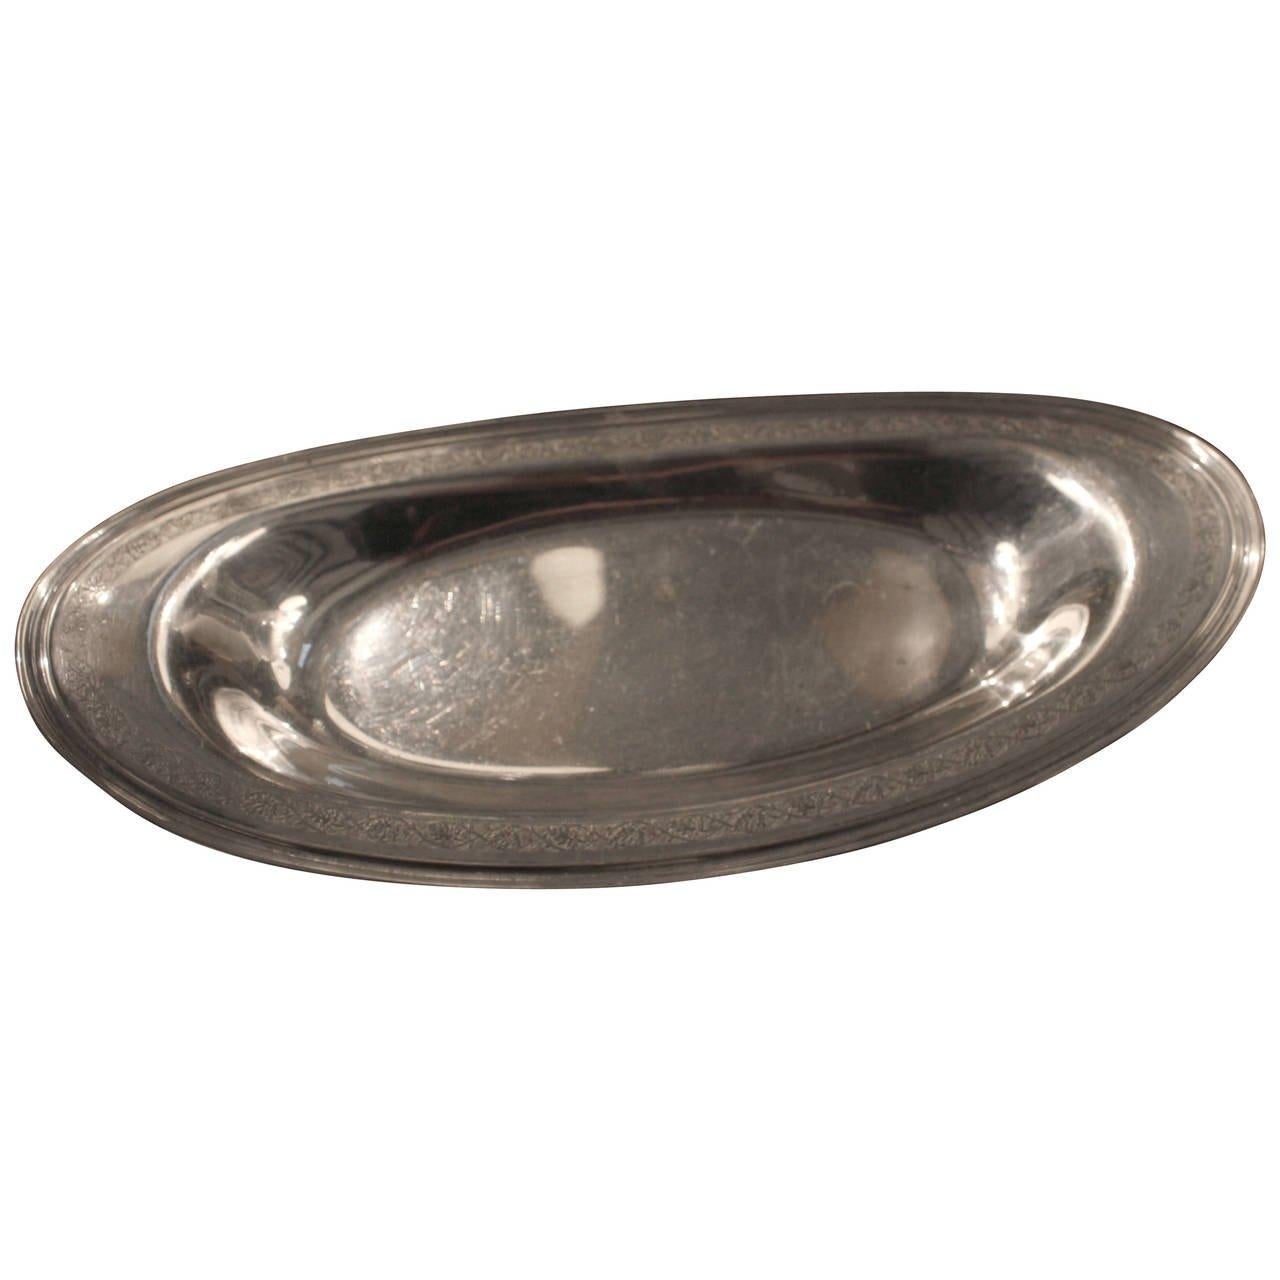 Oblong Oval Shaped, 1930s Silver Spoon Dish or Bowl, England In Excellent Condition For Sale In Southampton, NY